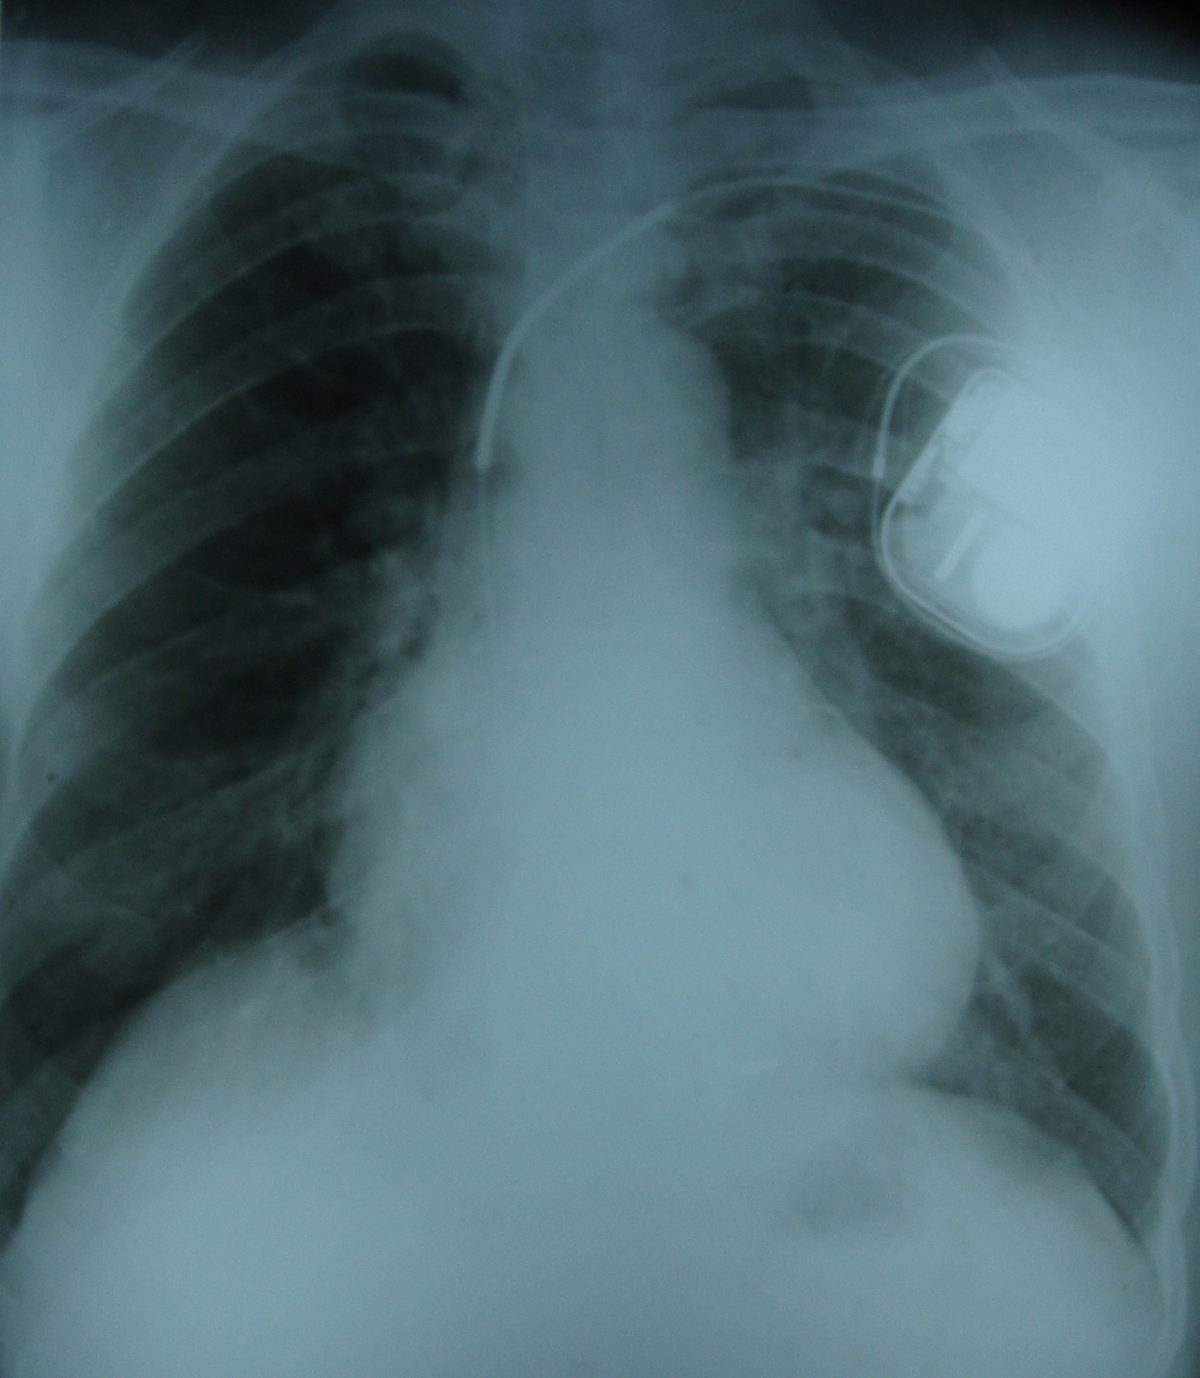 Implantable defibrillator high voltage coils on X-ray chest PA view